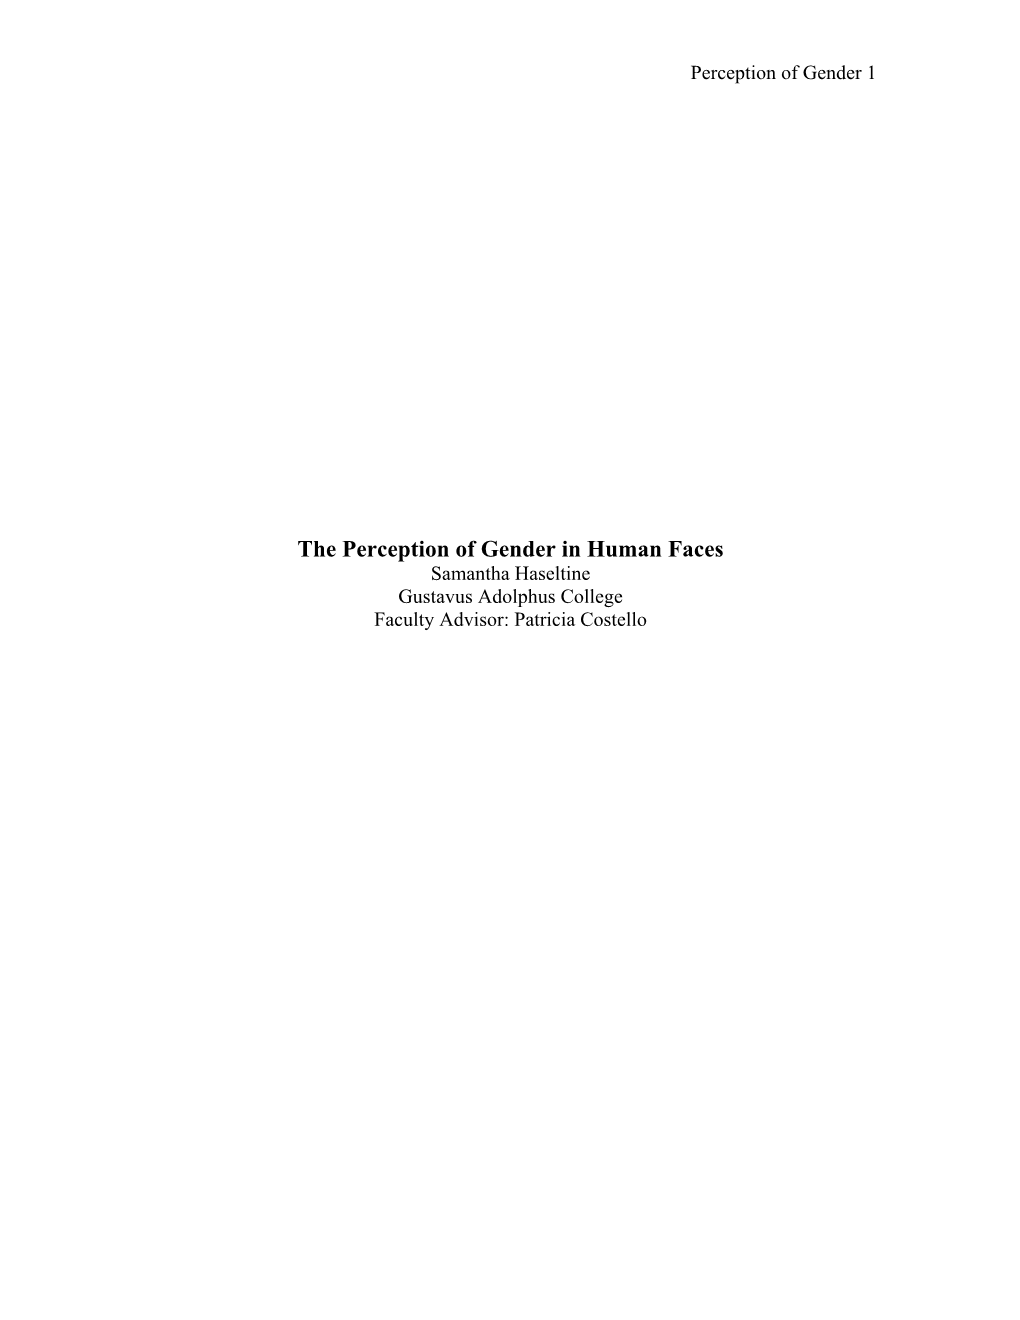 The Perception of Gender in Human Faces Samantha Haseltine Gustavus Adolphus College Faculty Advisor: Patricia Costello